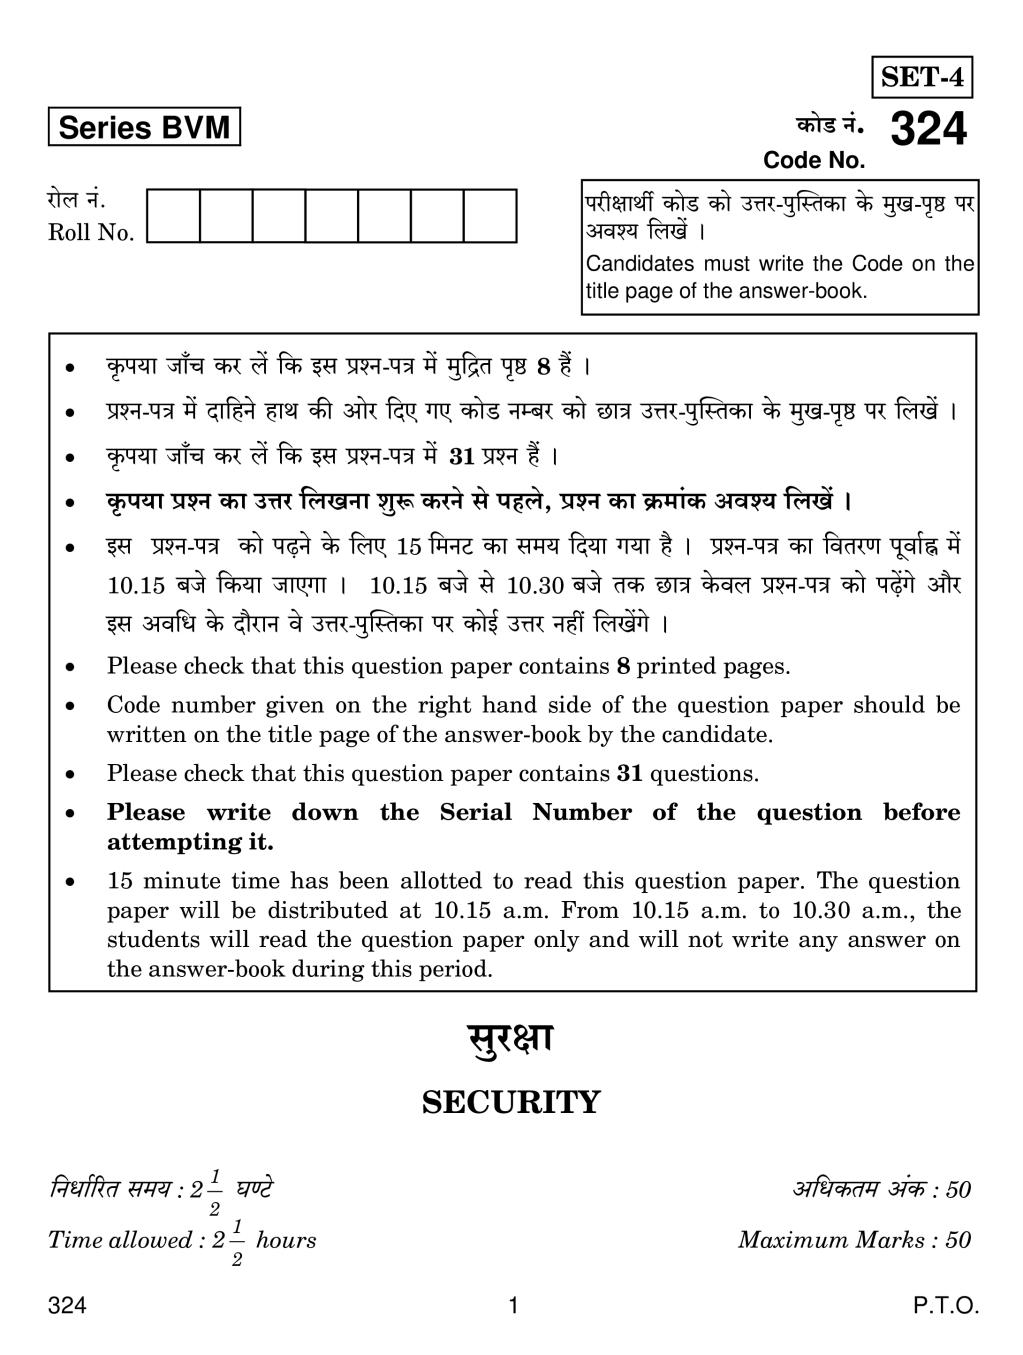 CBSE Class 12 Security Question Paper 2019 - Page 1